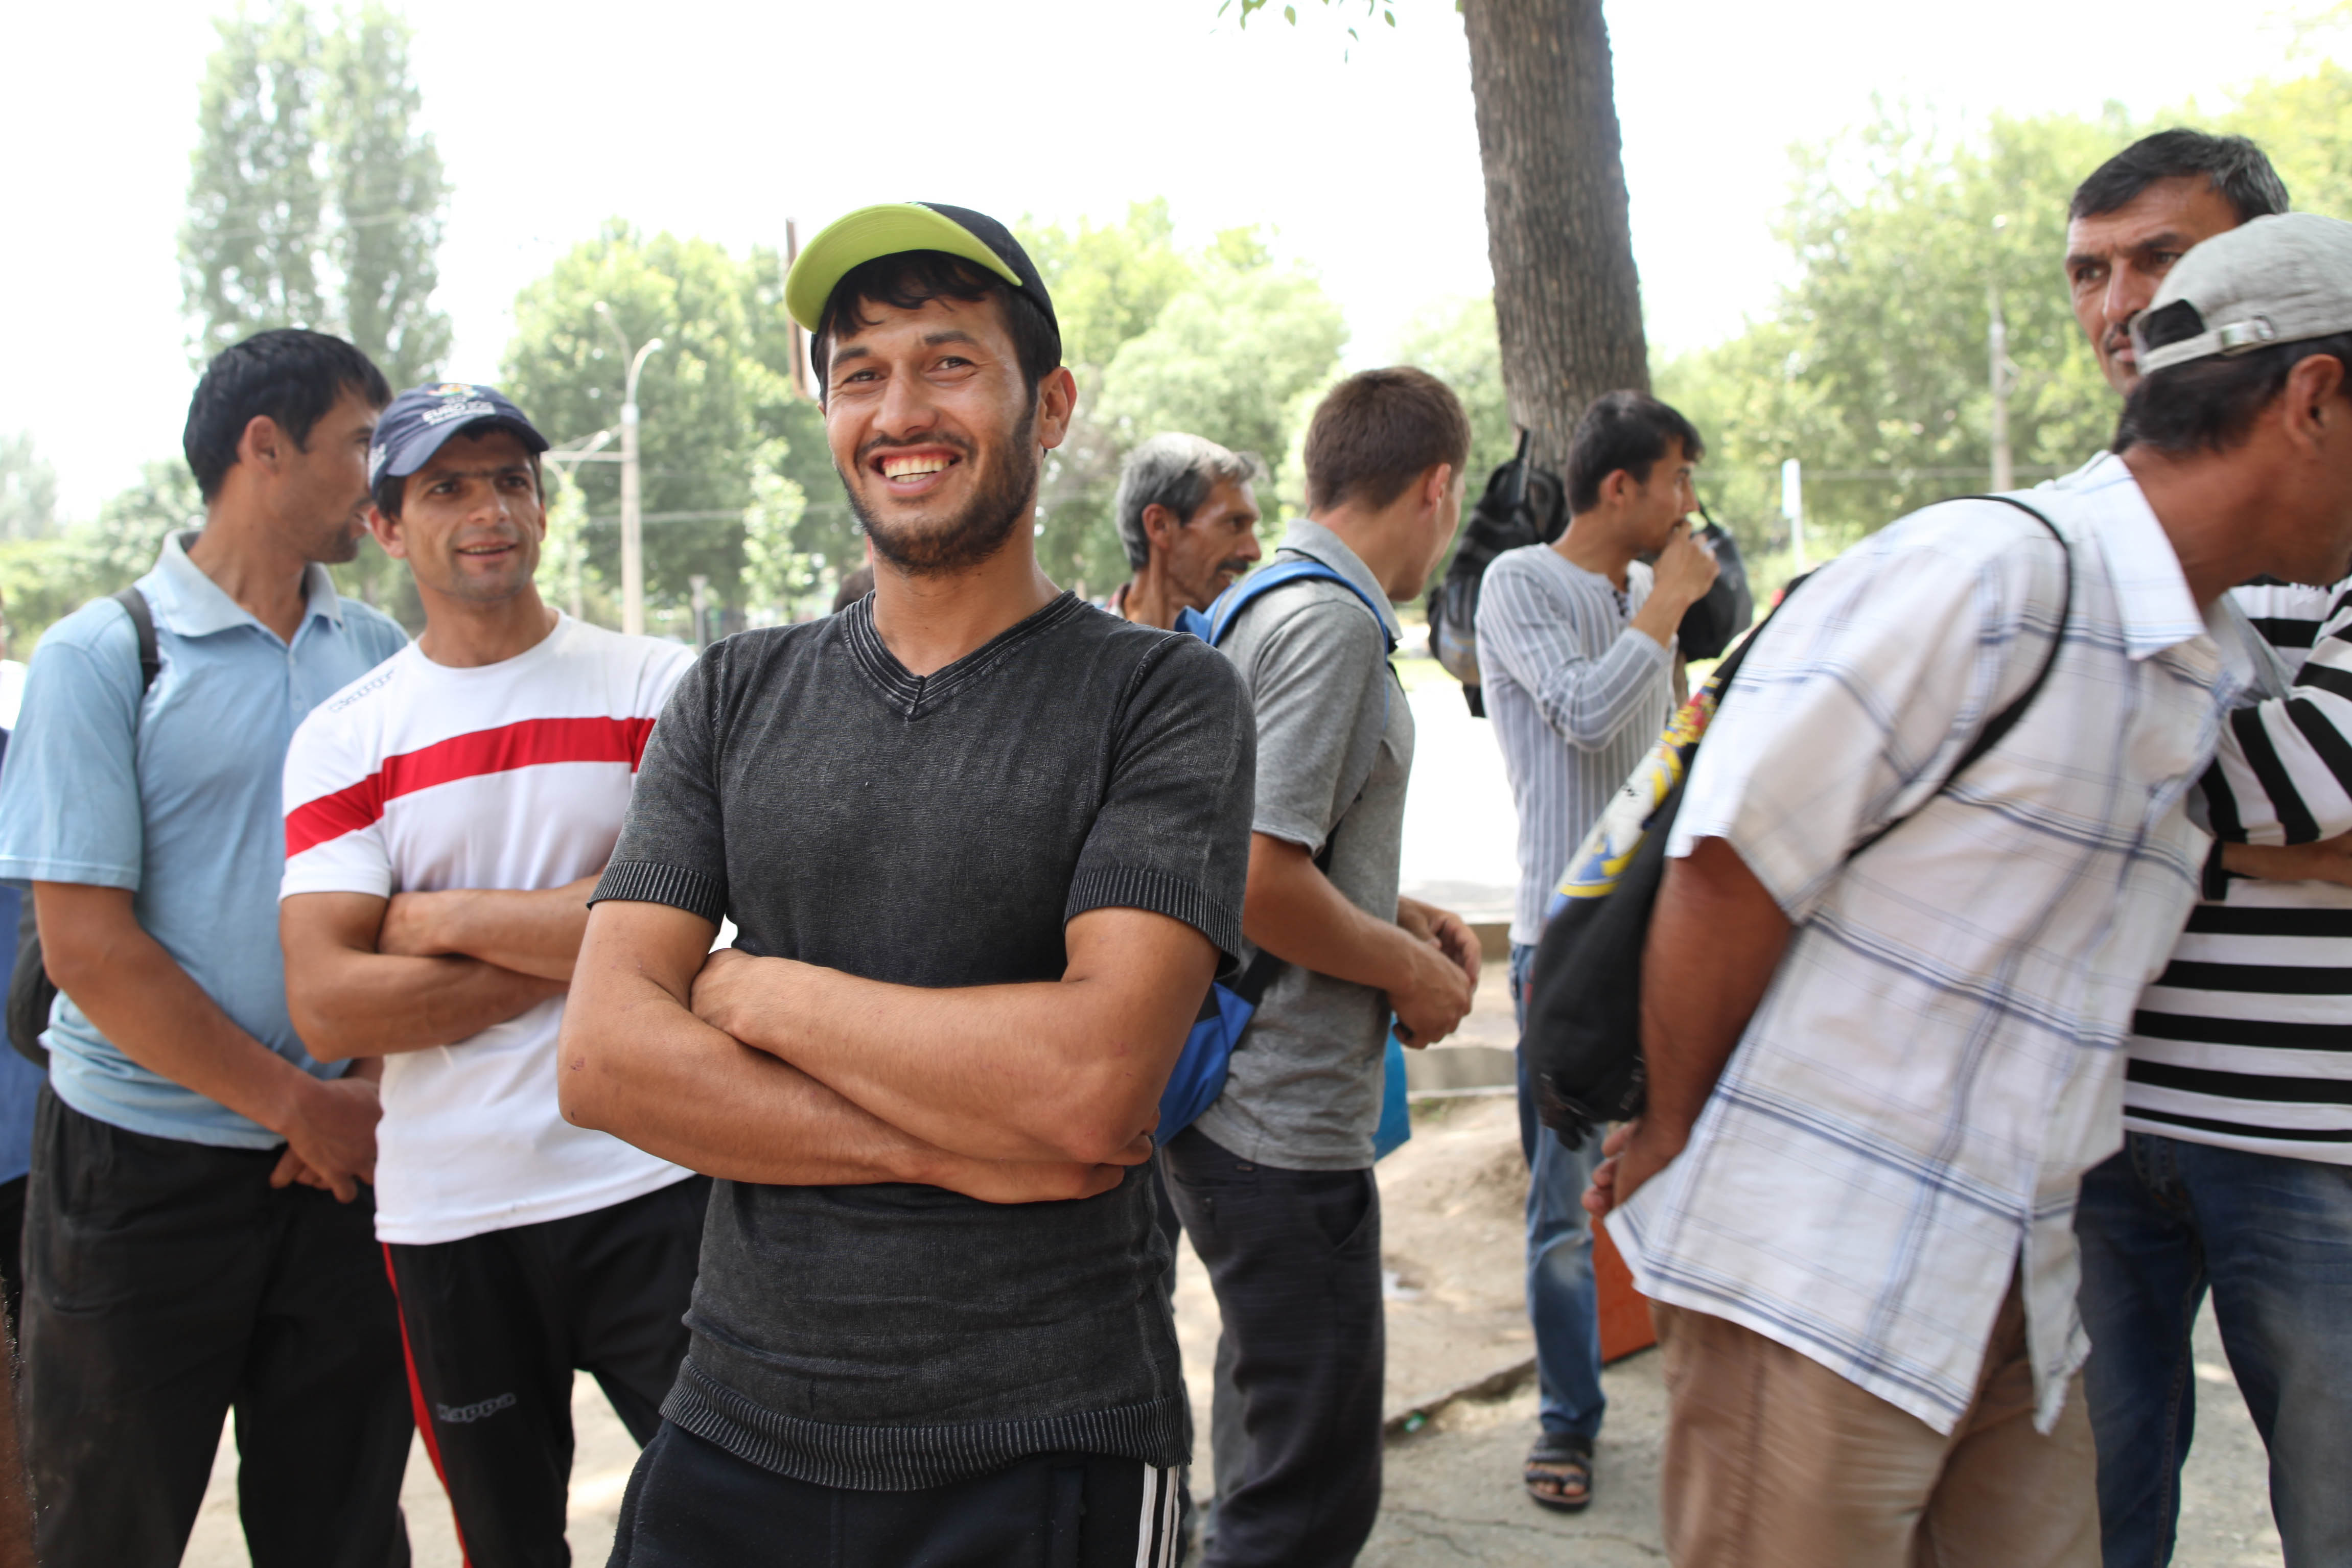 Muhammed Ziyo, 26, a day laborer, poses with other day laborers in the background on a street corner in the 82nd district of Dushanbe, Tajikistan, on June 11, 2015 (The Washington Post/Getty Images)